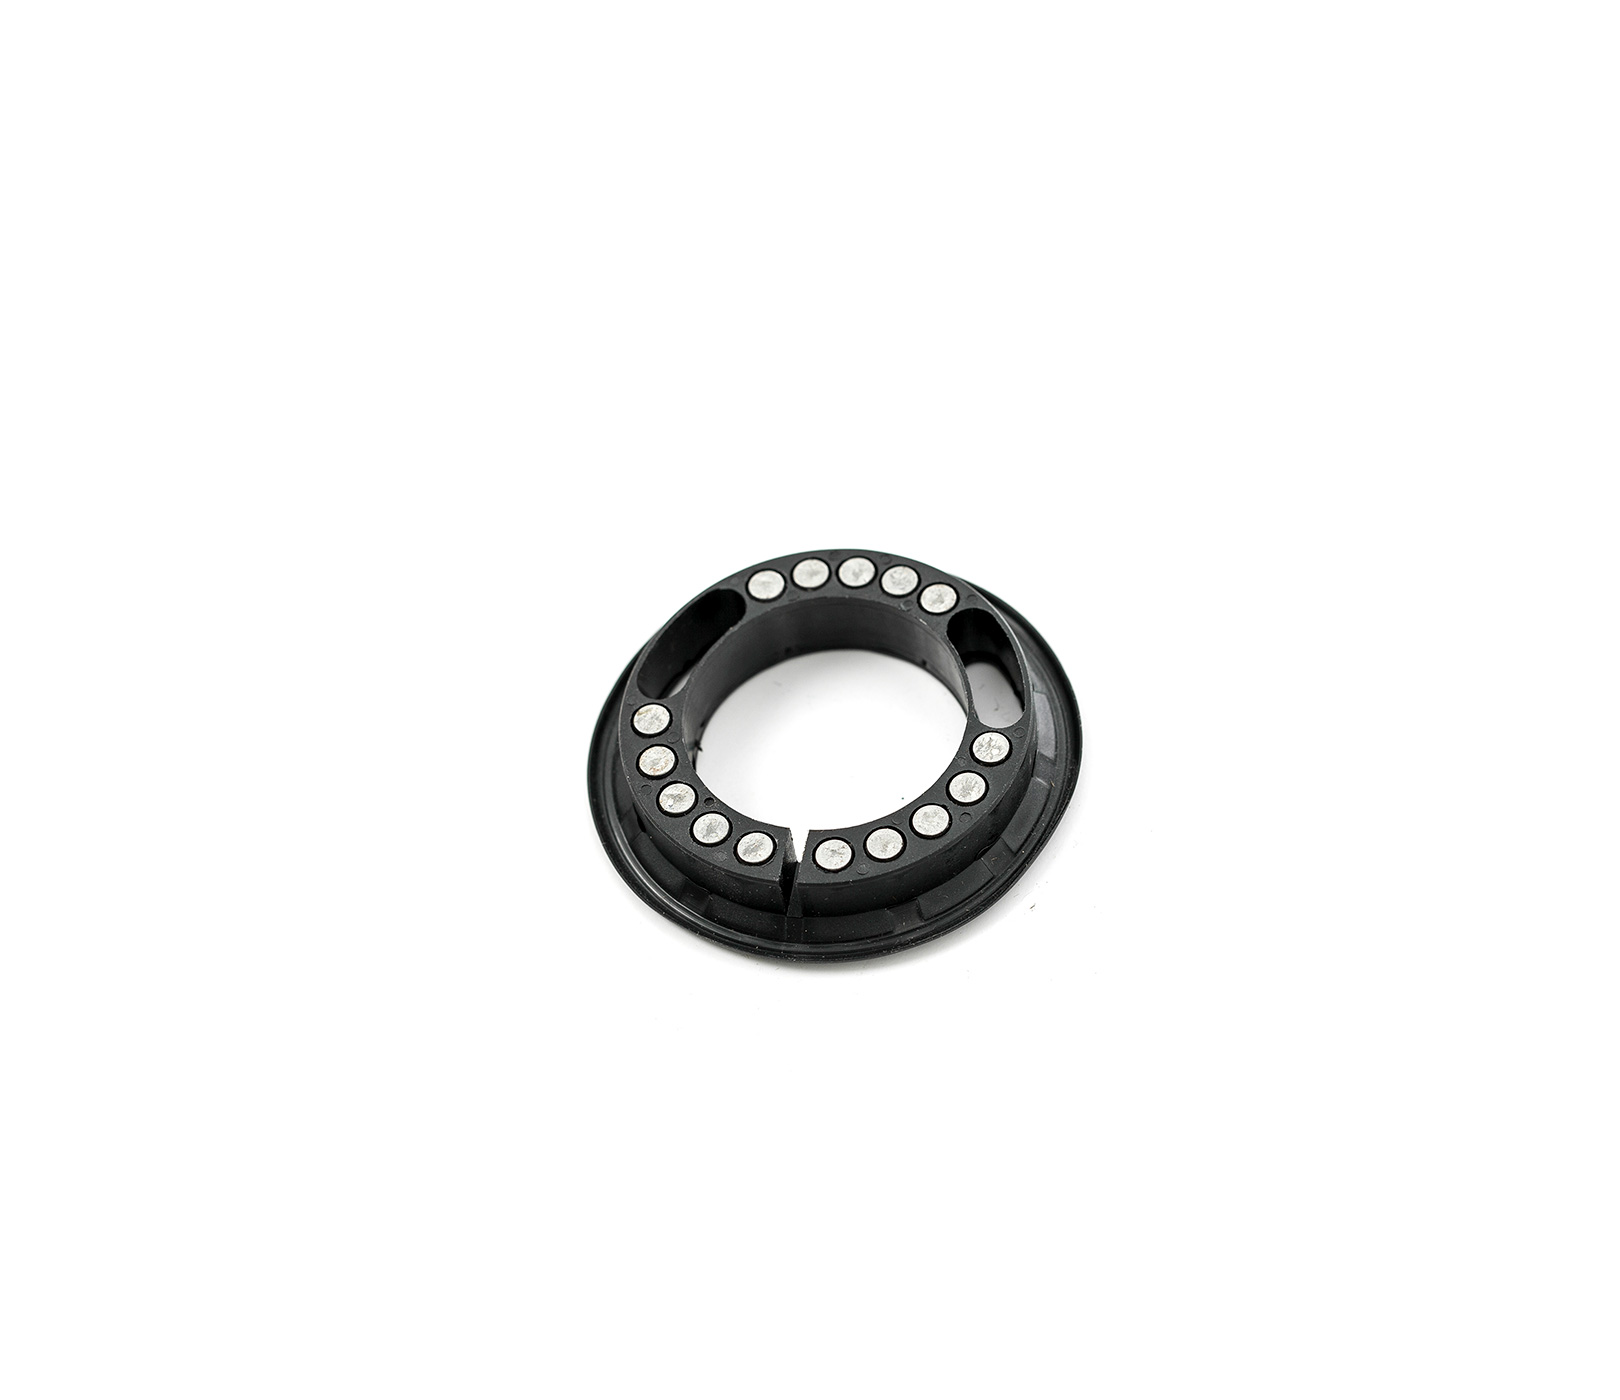 ORCA OMX 20 ICR HEADSET COMPRESSION RING